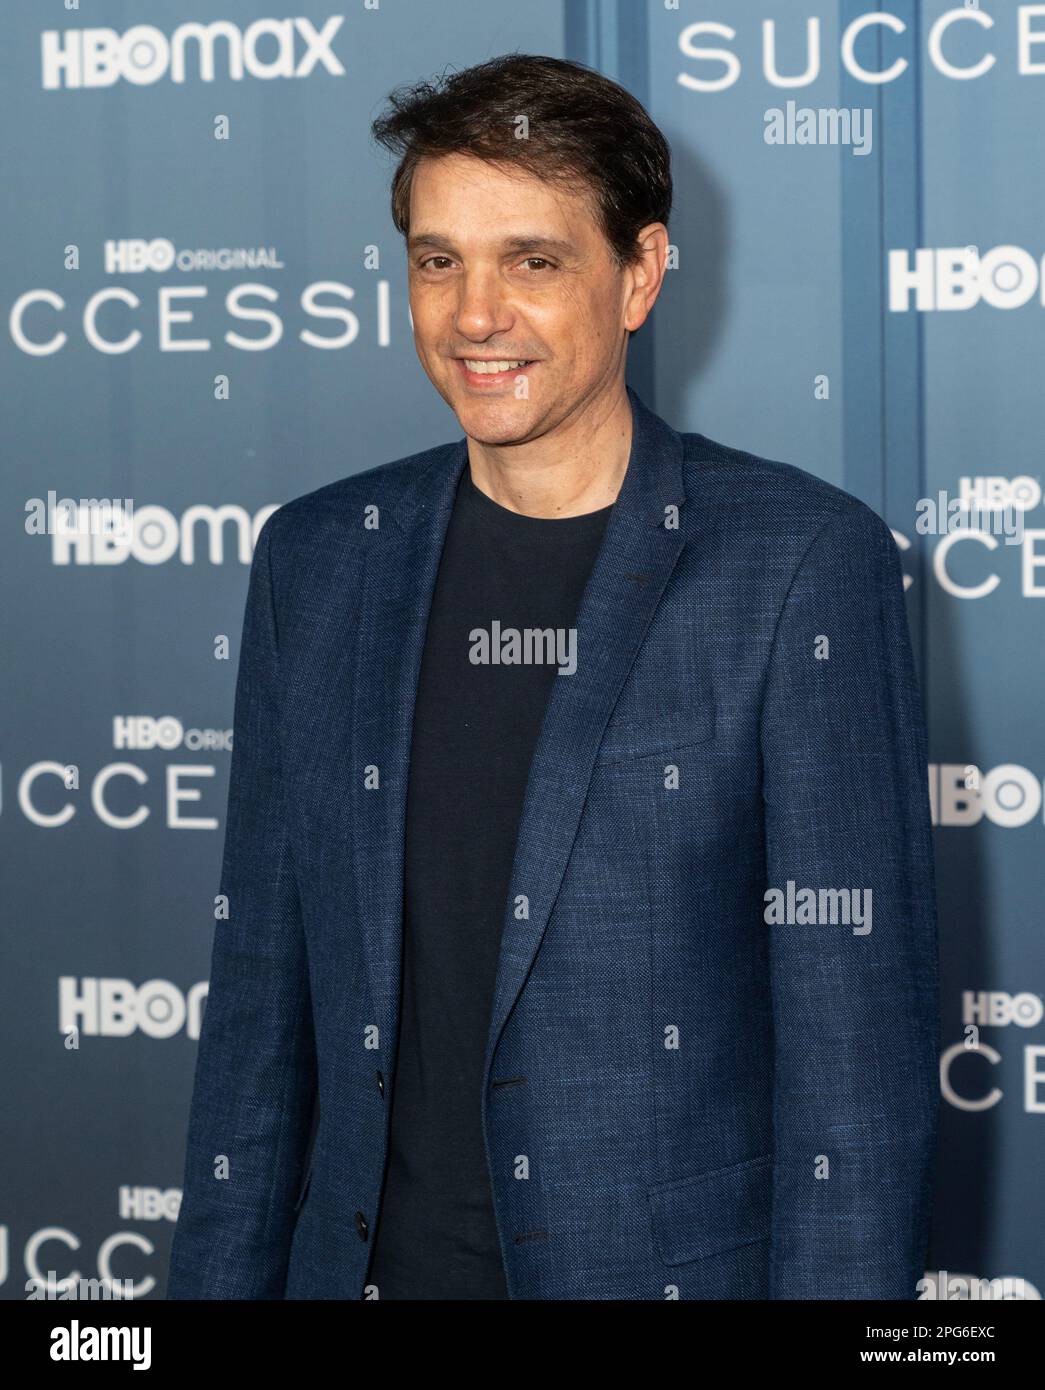 Ralph Macchio attends HBO's "Succession" Season 4 Premiere at Jazz at